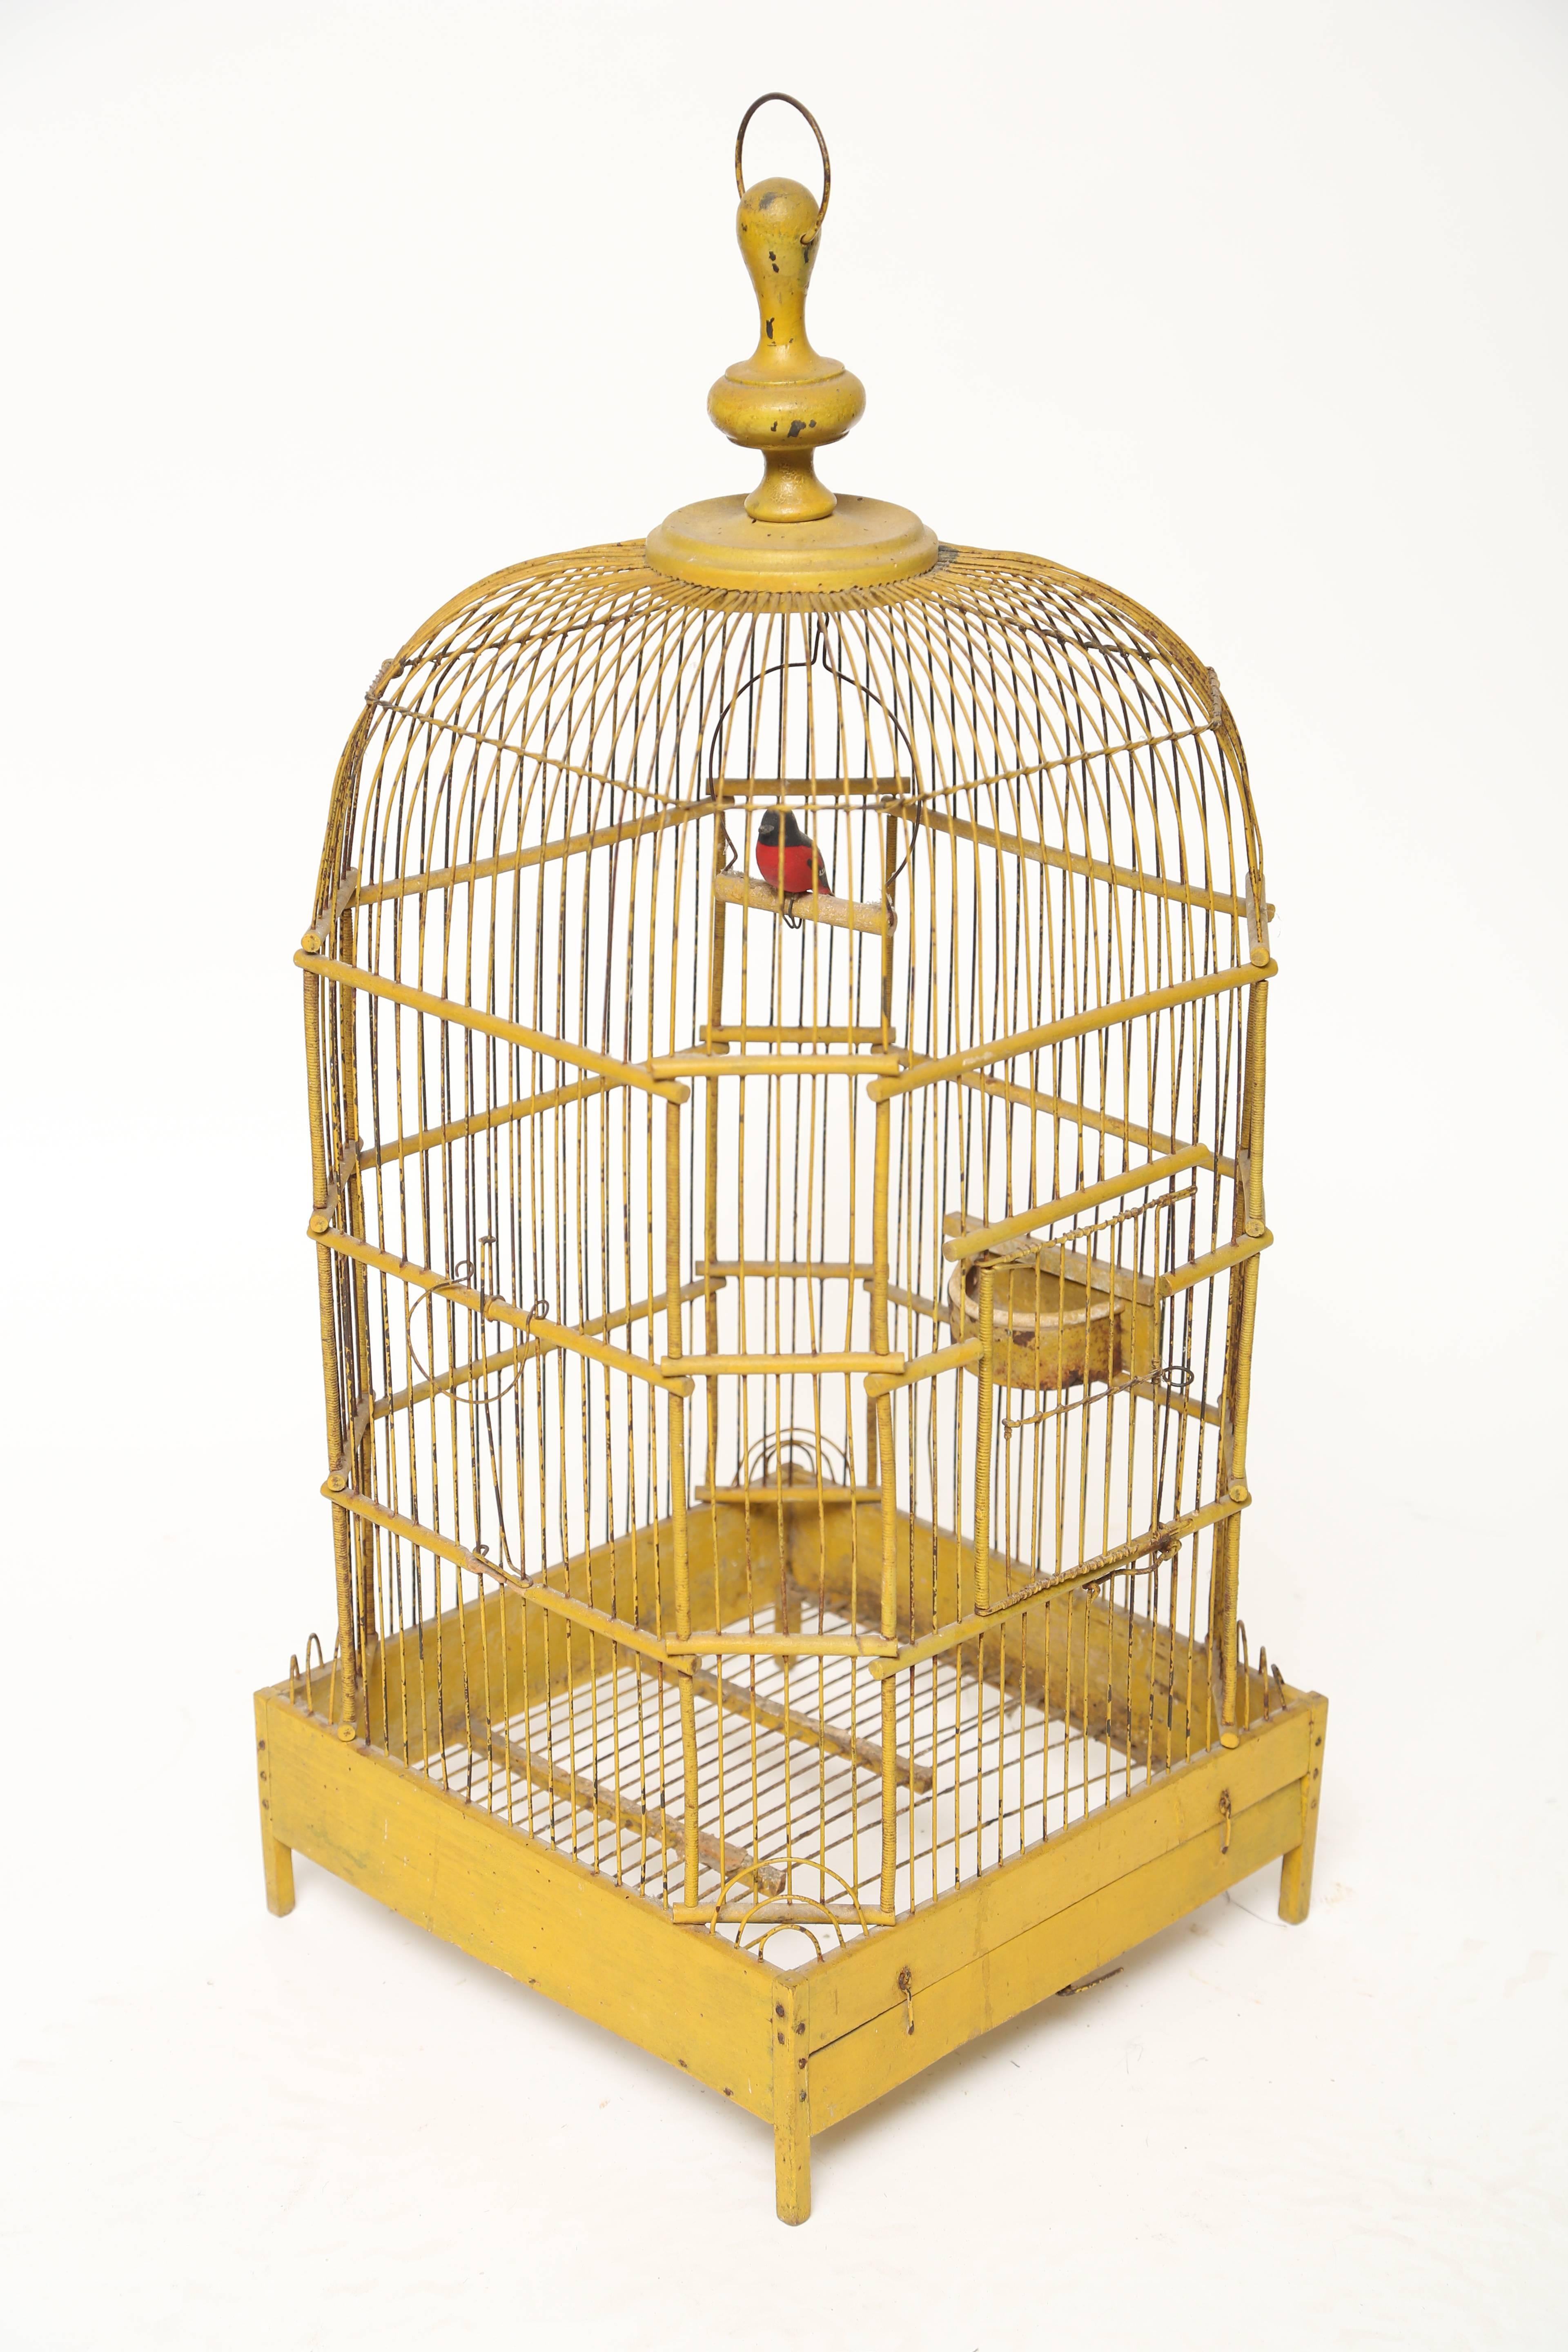 Dome toped French ochre bird cage on four legs, original feeder and door centre front. There is a large turned finial at the top and a faux bird within on its perch.  If you want that south of France feeling this piece has it.